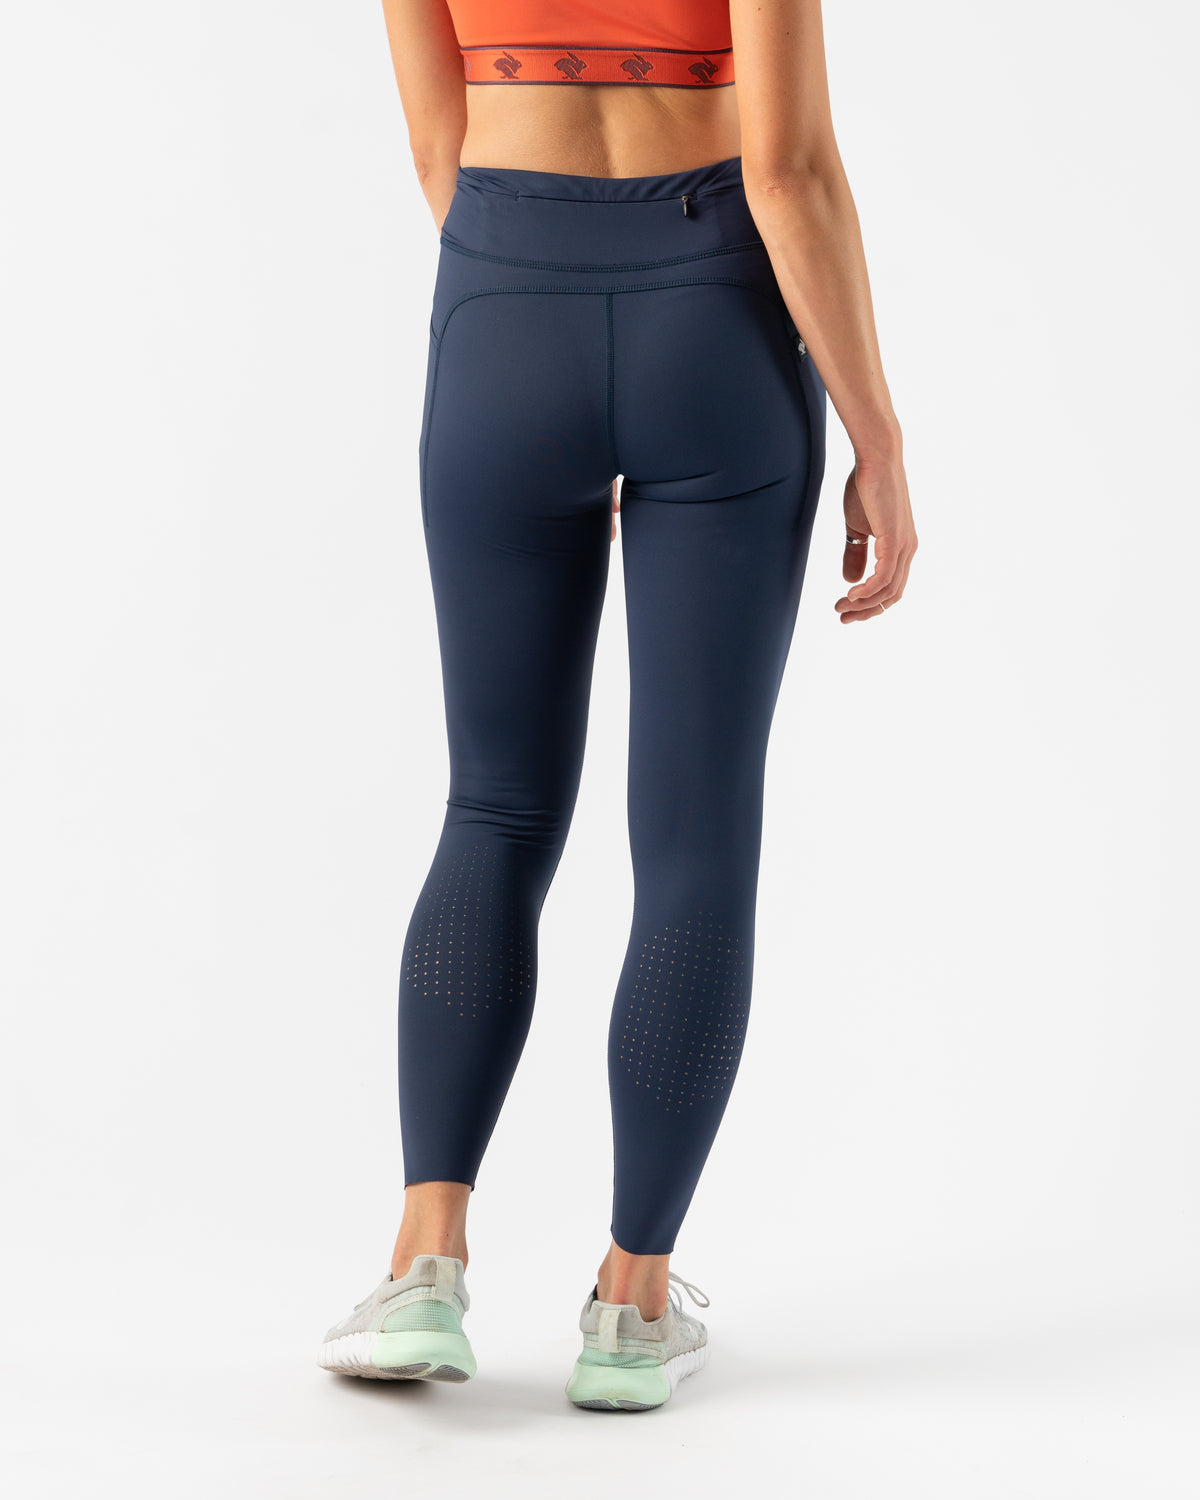 Buy Cultsport Black Tights With Inner Shorts for Women Online